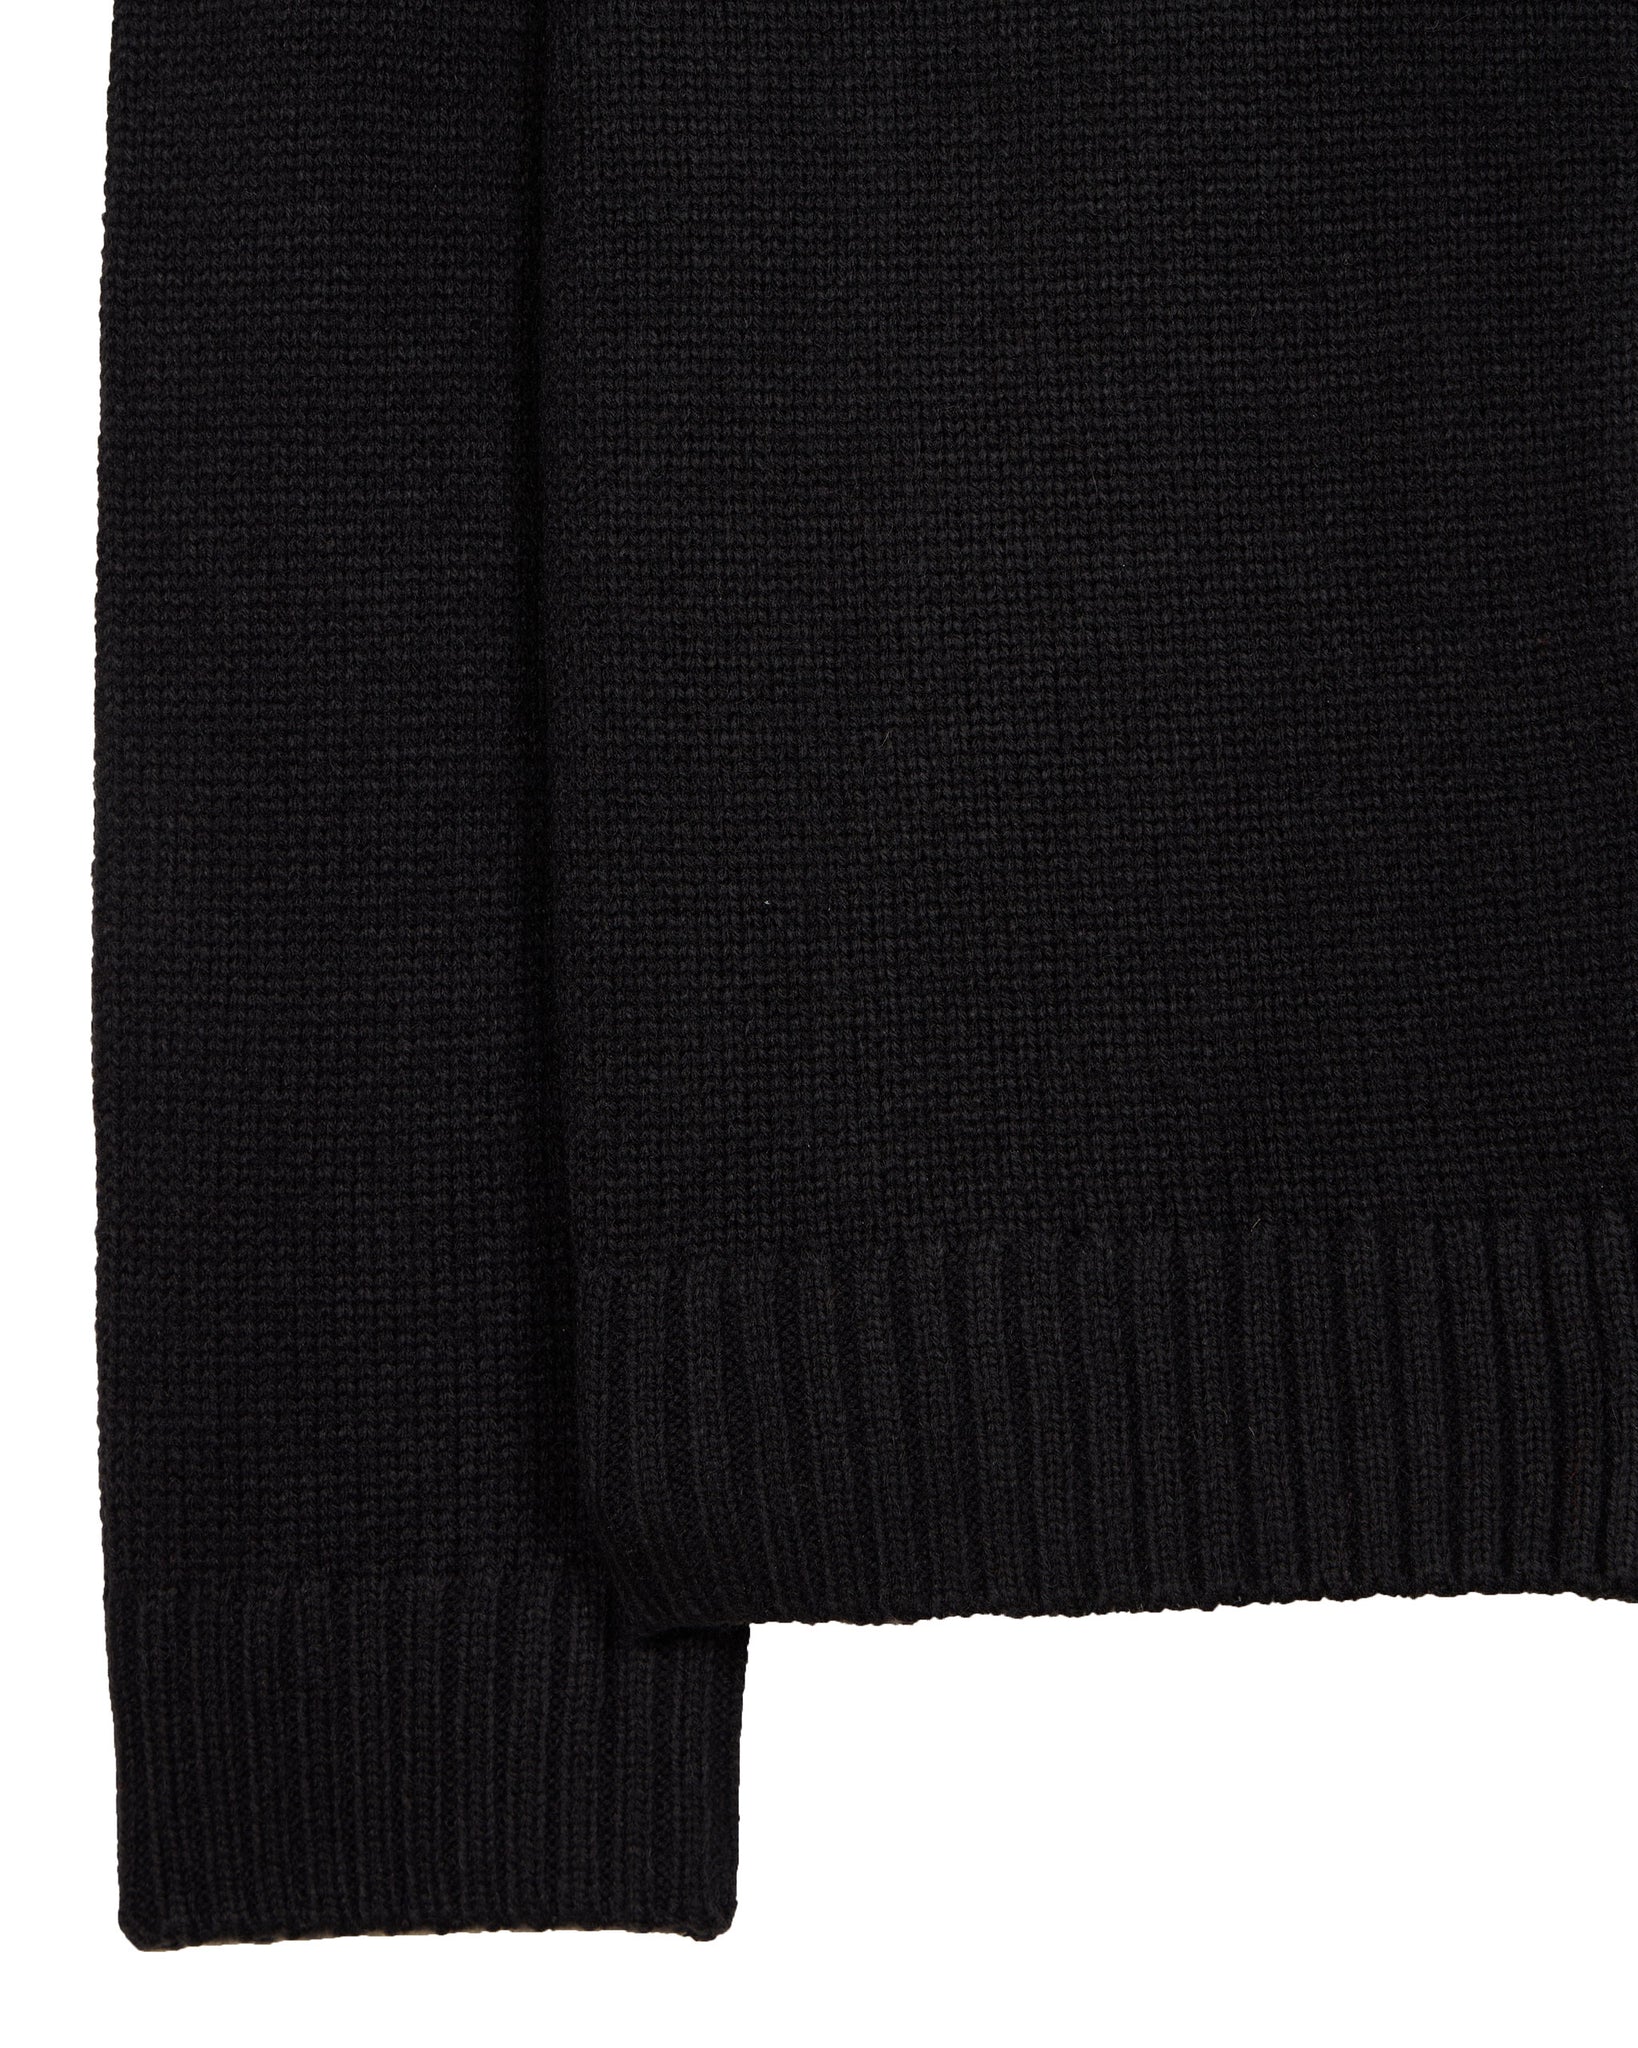 Toledo Knitted Button Hoodie Black